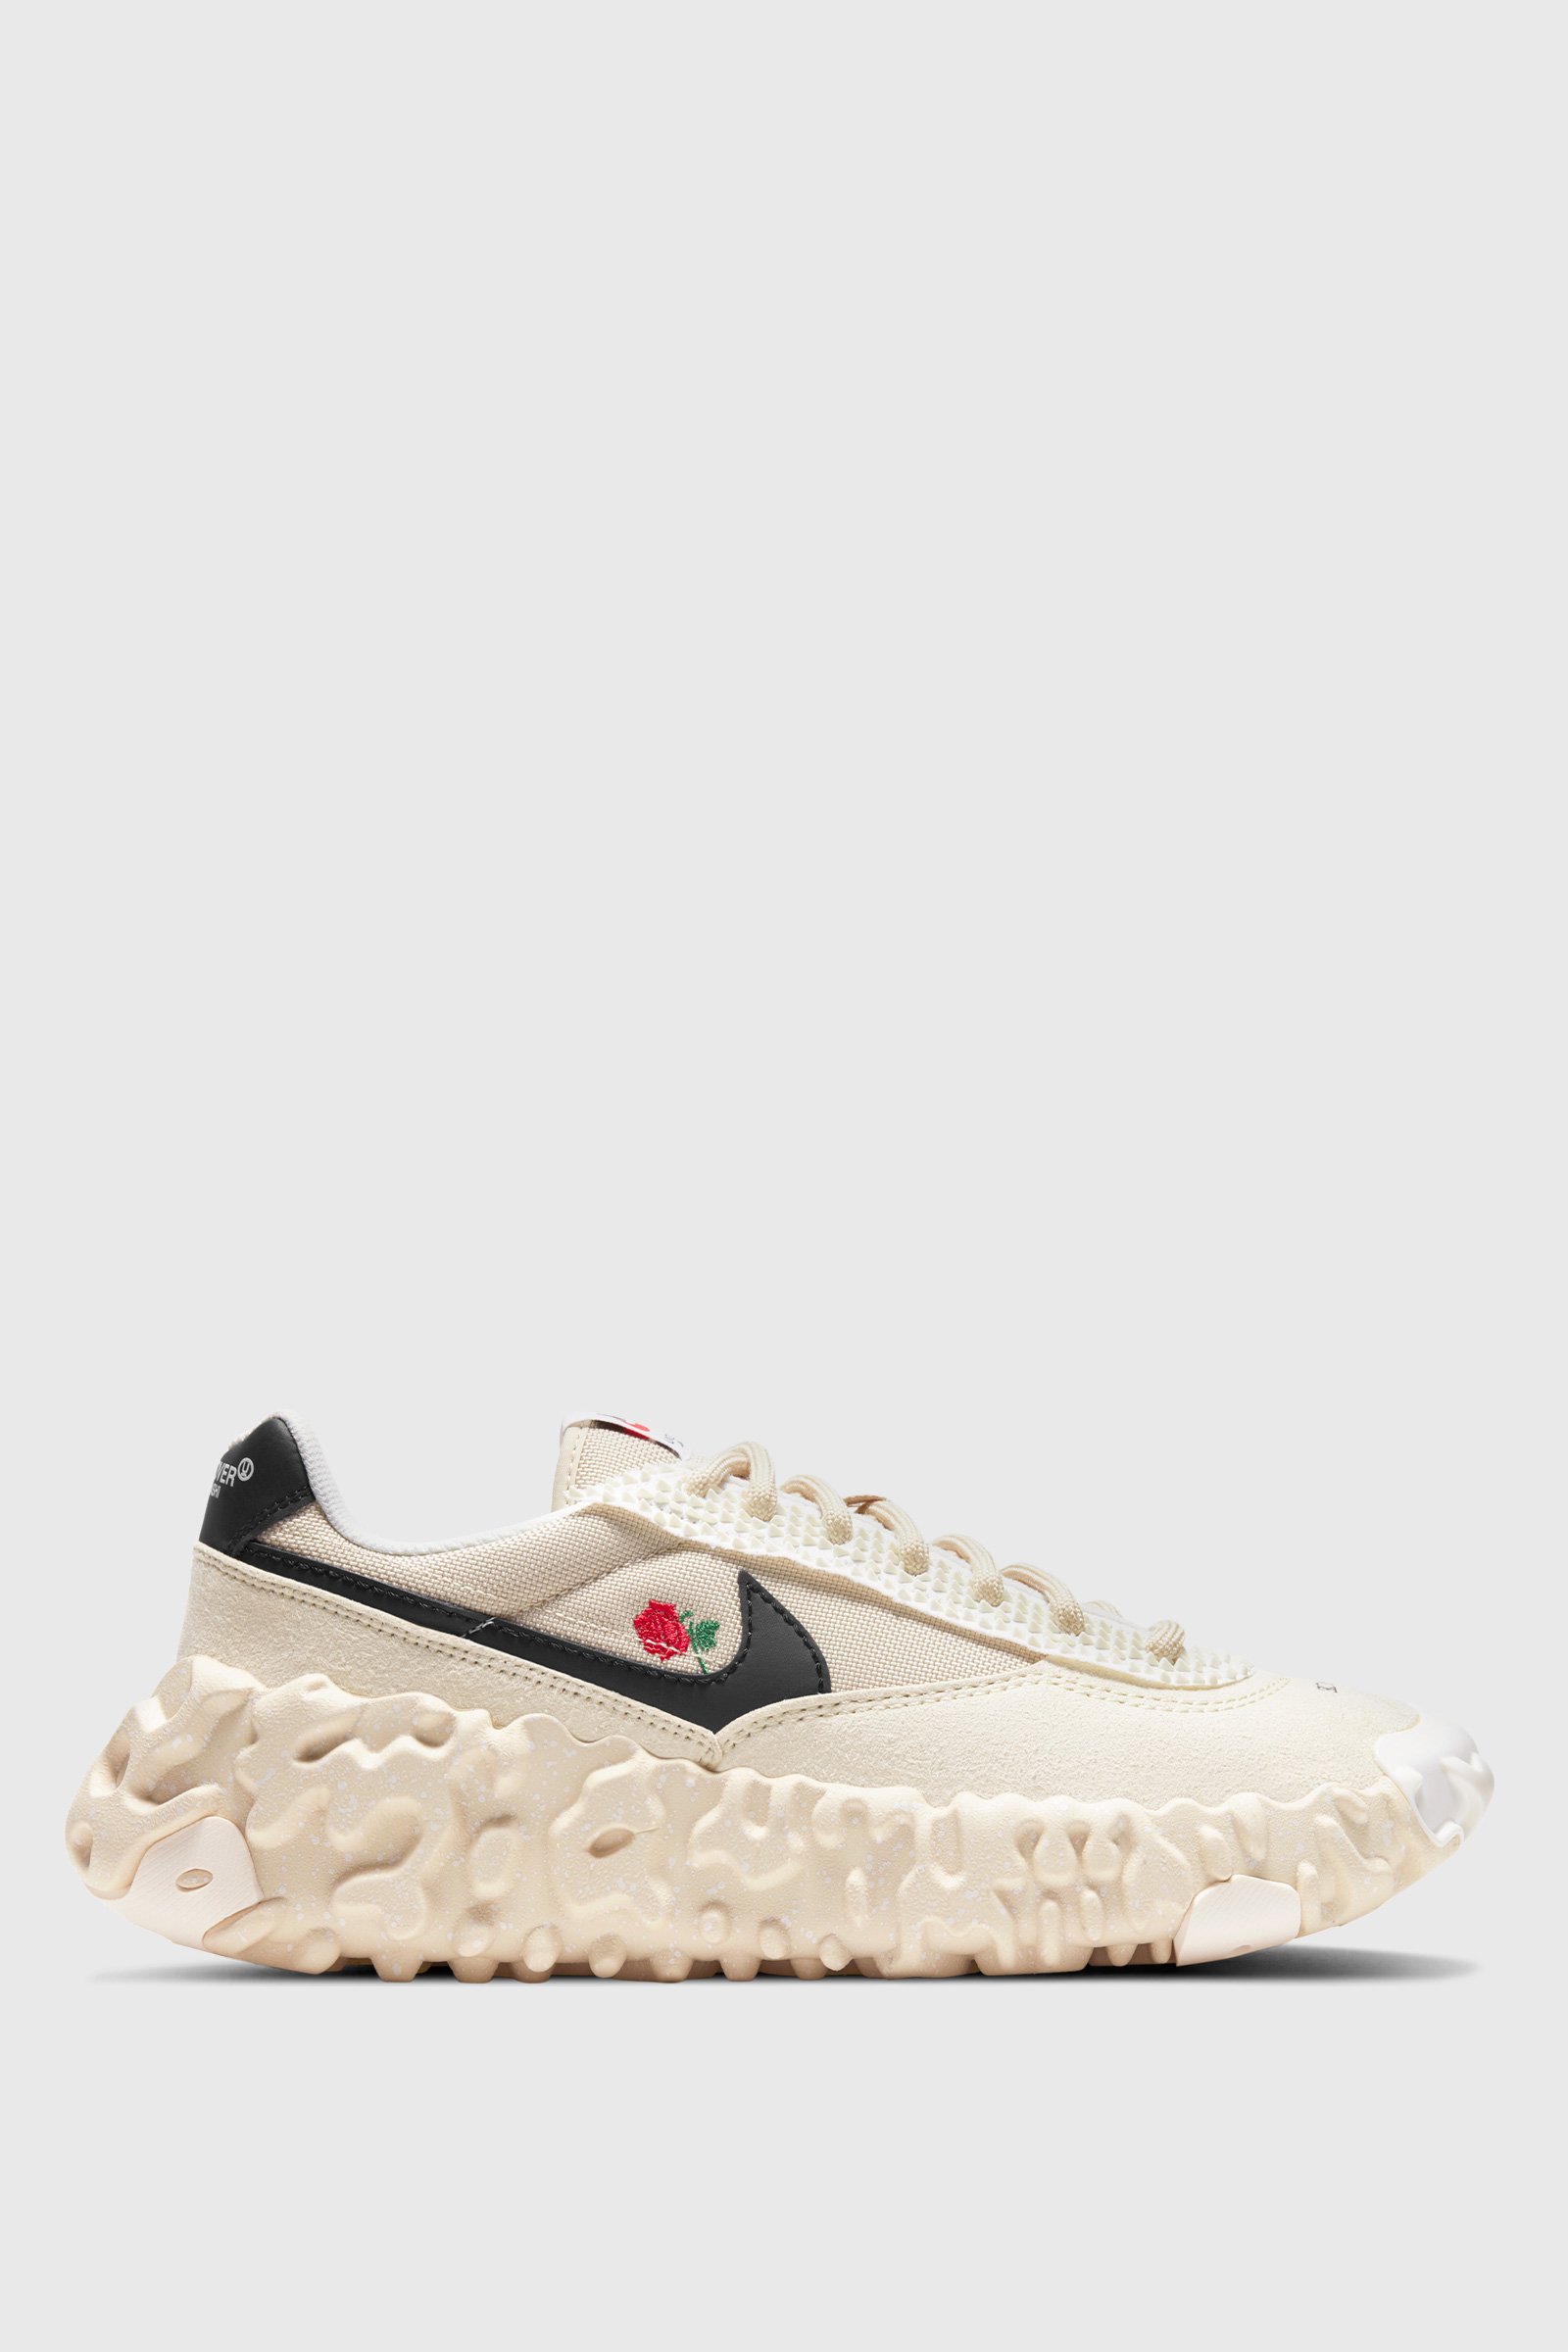 Nike Nike Overbreak / Undercover Overcast fossil sail (200) | WoodWood.com